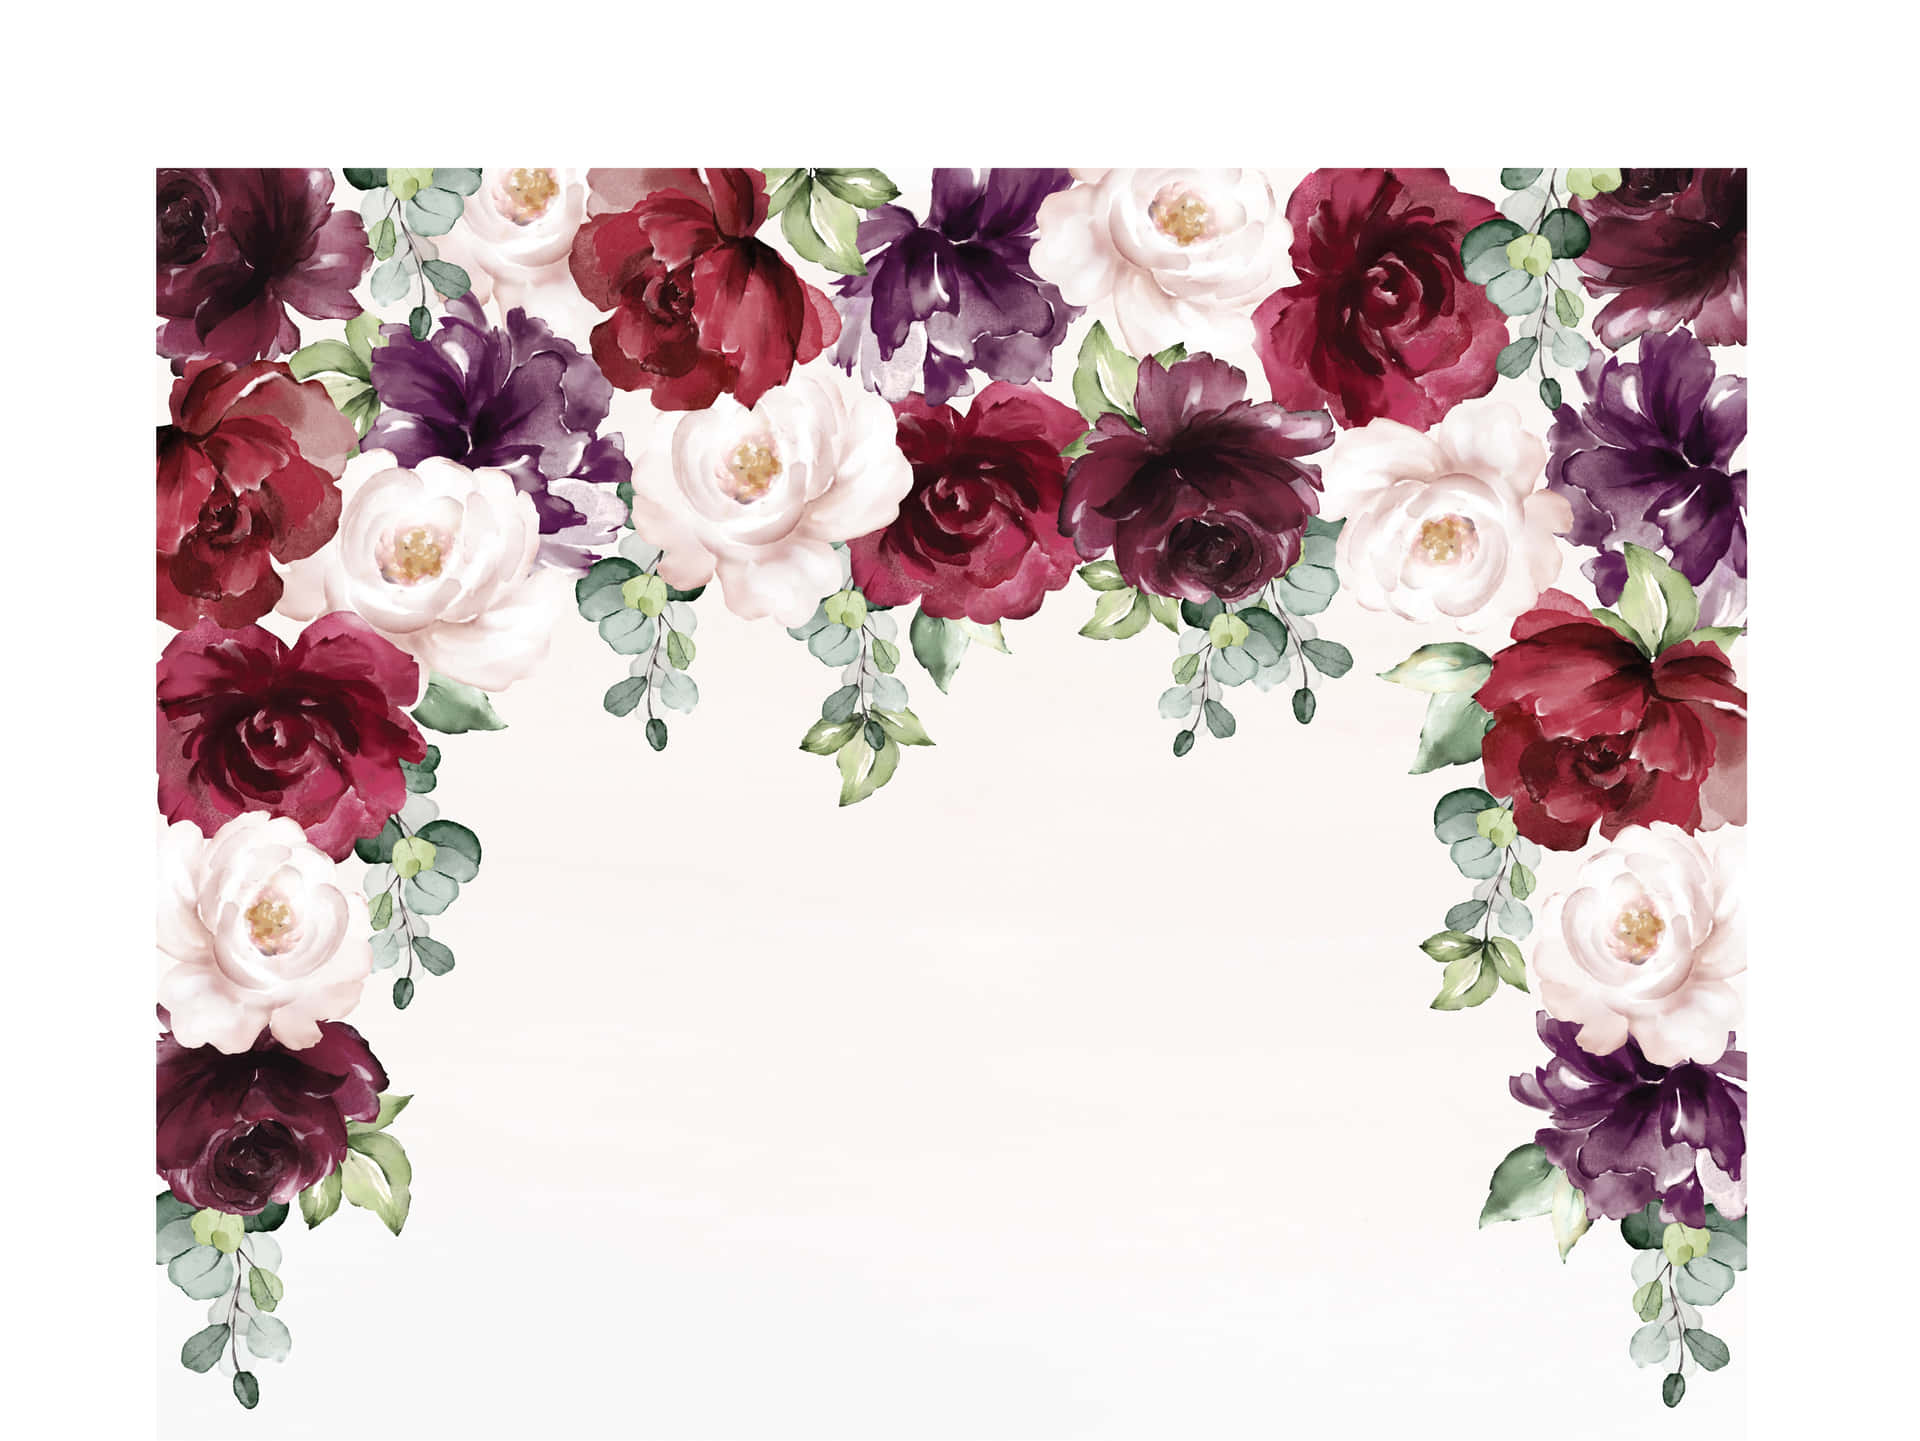 A Floral Background With Burgundy And White Flowers Wallpaper